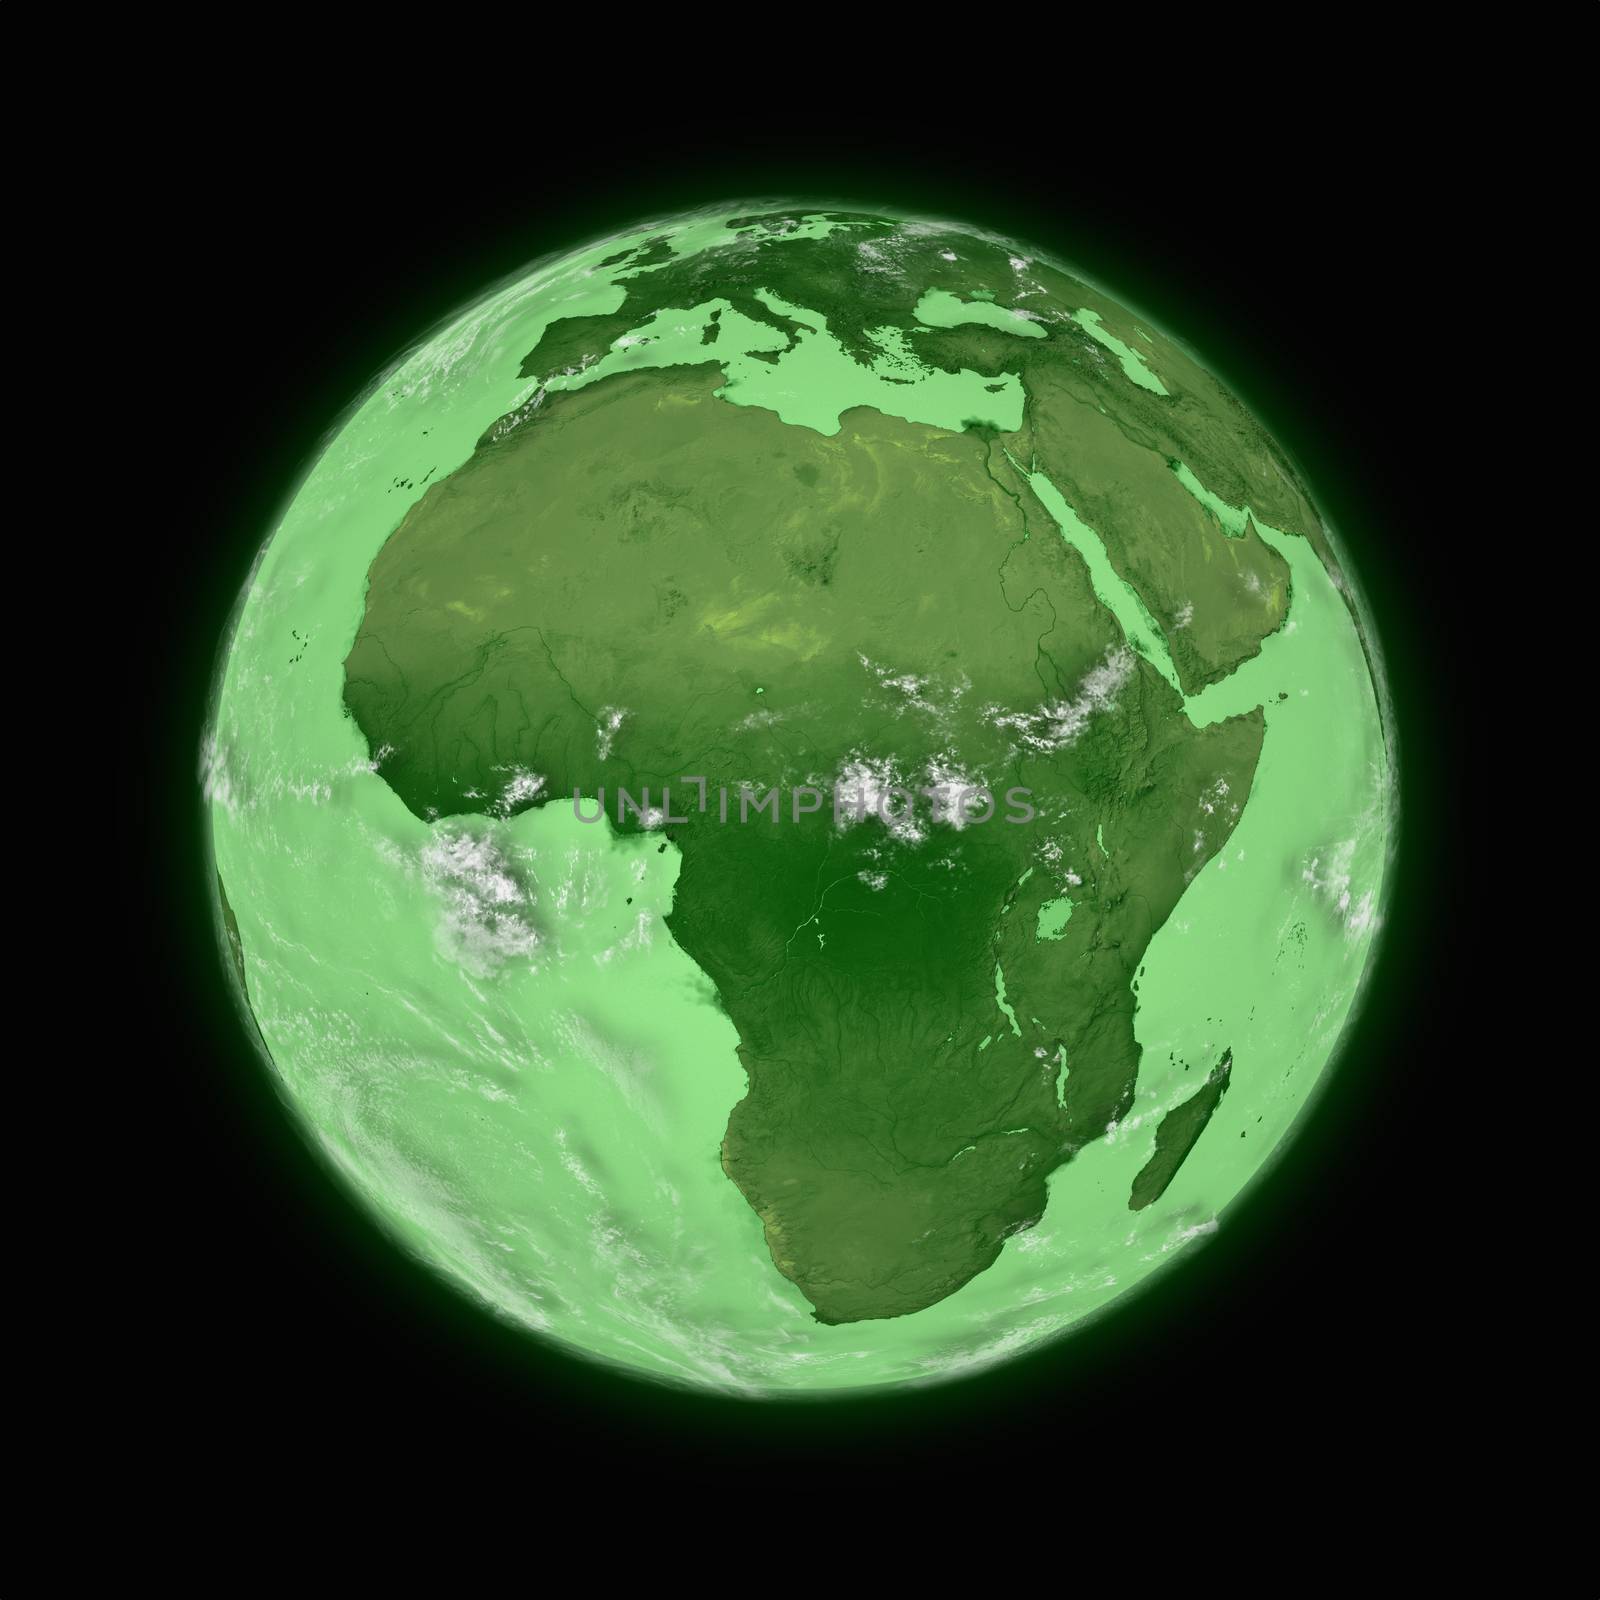 Africa on green planet Earth isolated on black background. Highly detailed planet surface. Elements of this image furnished by NASA.